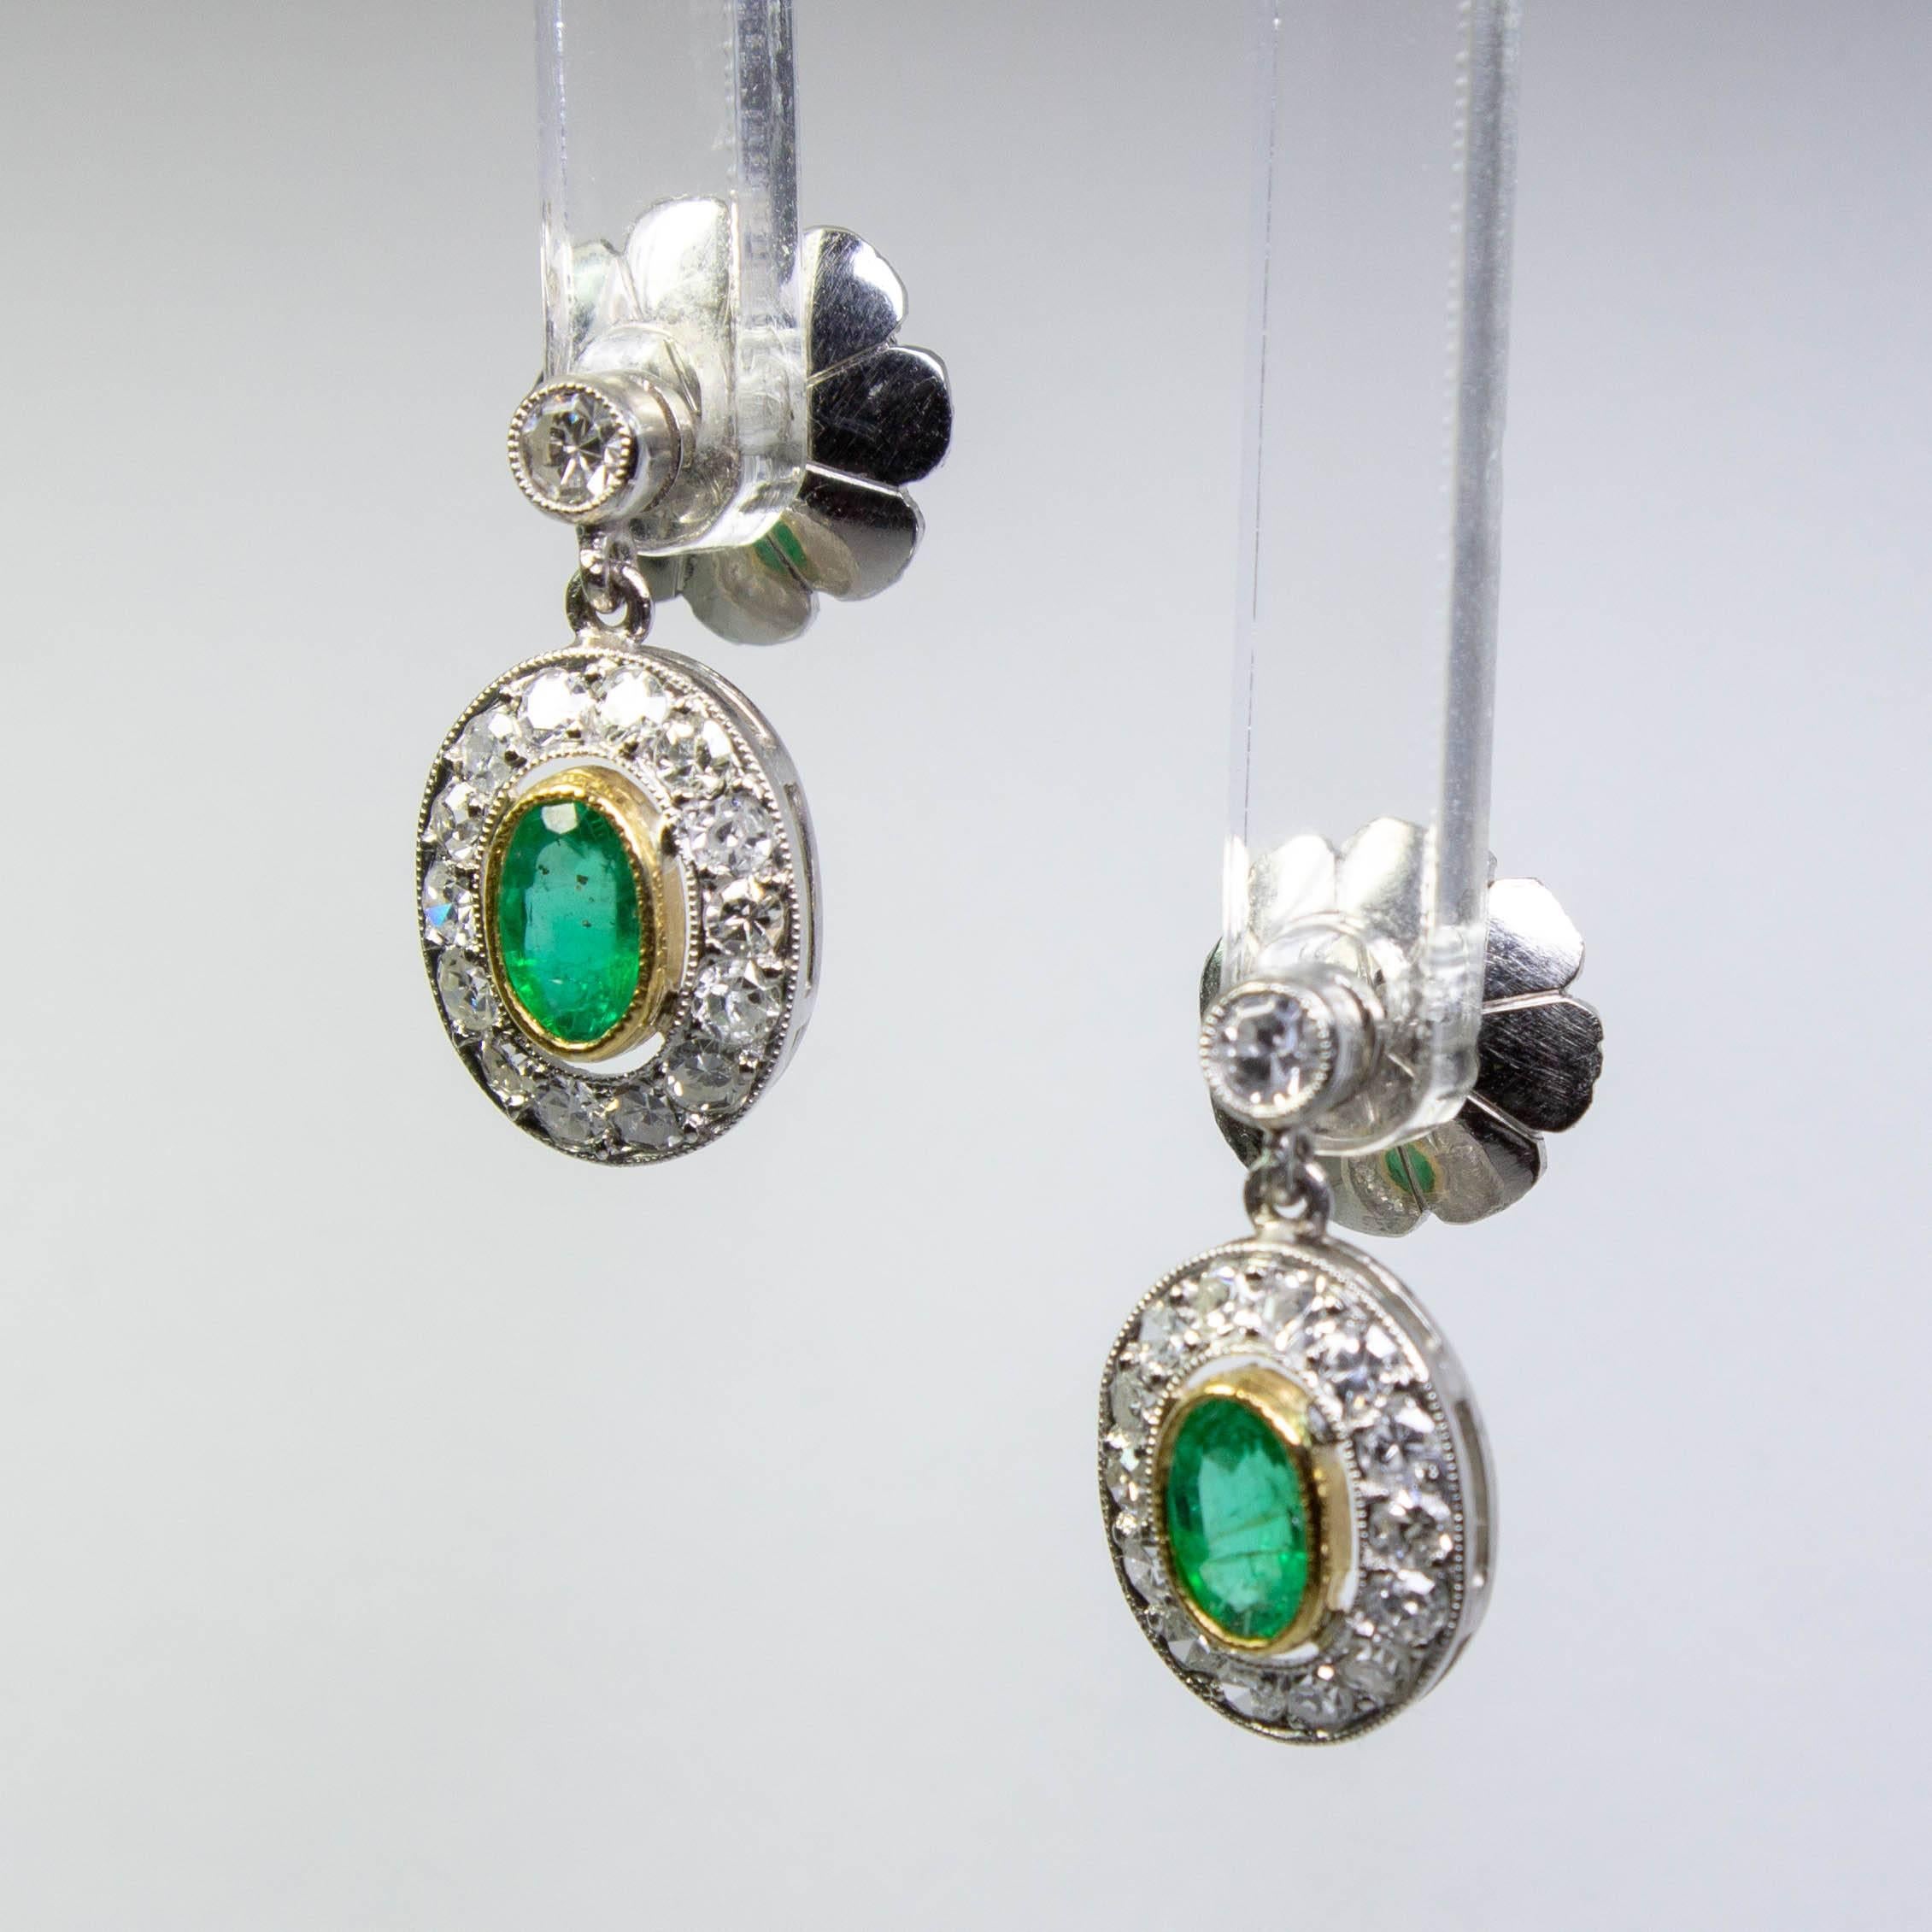 Period: Edwardian (1901-1920)

Composition: Platinum.
Stones: 
•	2 natural oval cut emeralds that weigh 0.46ctw. (0.23ctw. each).
•	30 Single cut diamonds of I-VS2 quality that weigh 0.71ctw.

Earrings measure: 16mm by 8mm 
Thick: 4mm
Total weight: